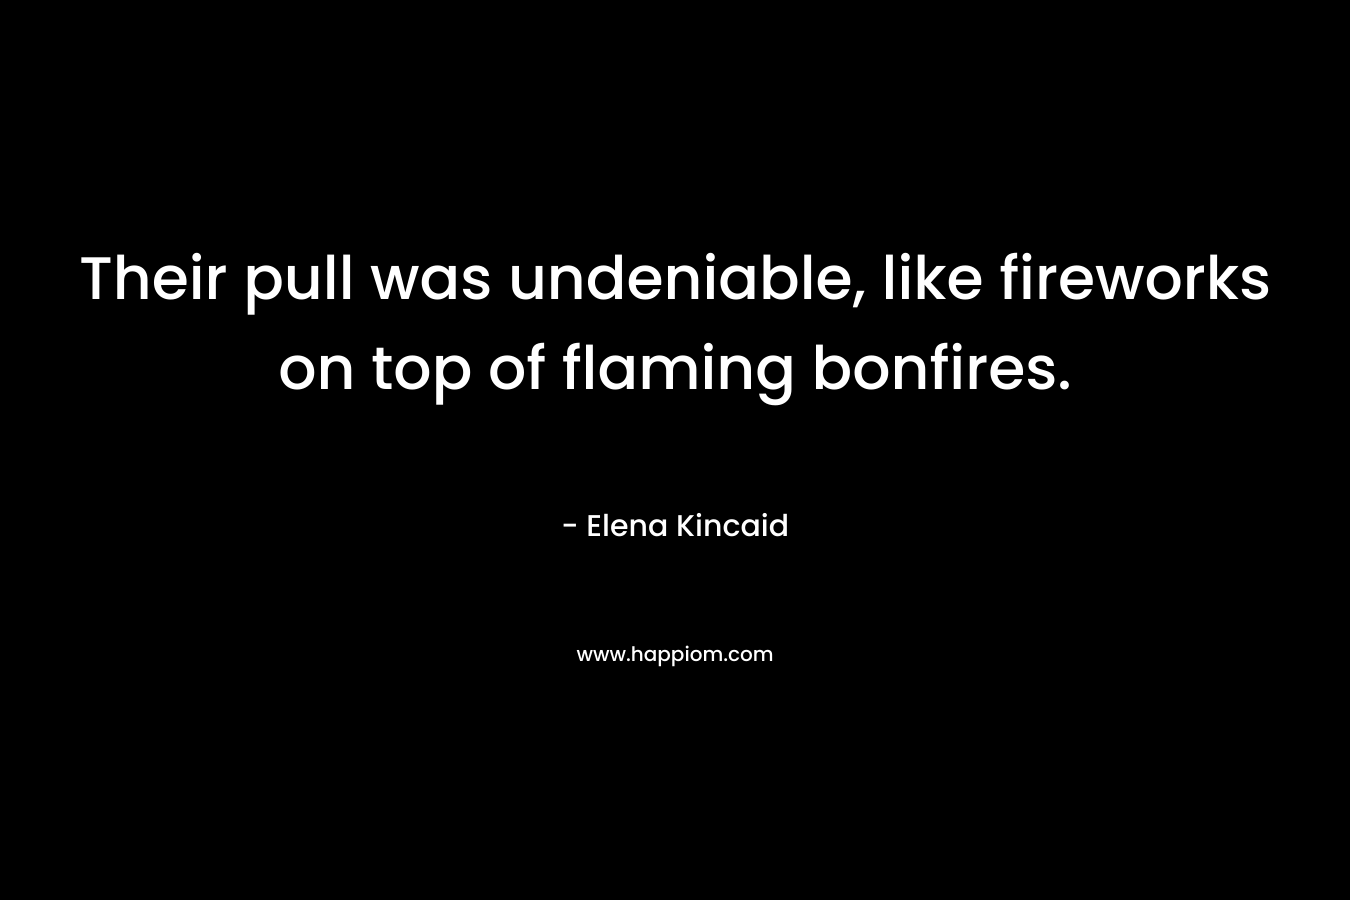 Their pull was undeniable, like fireworks on top of flaming bonfires. – Elena Kincaid